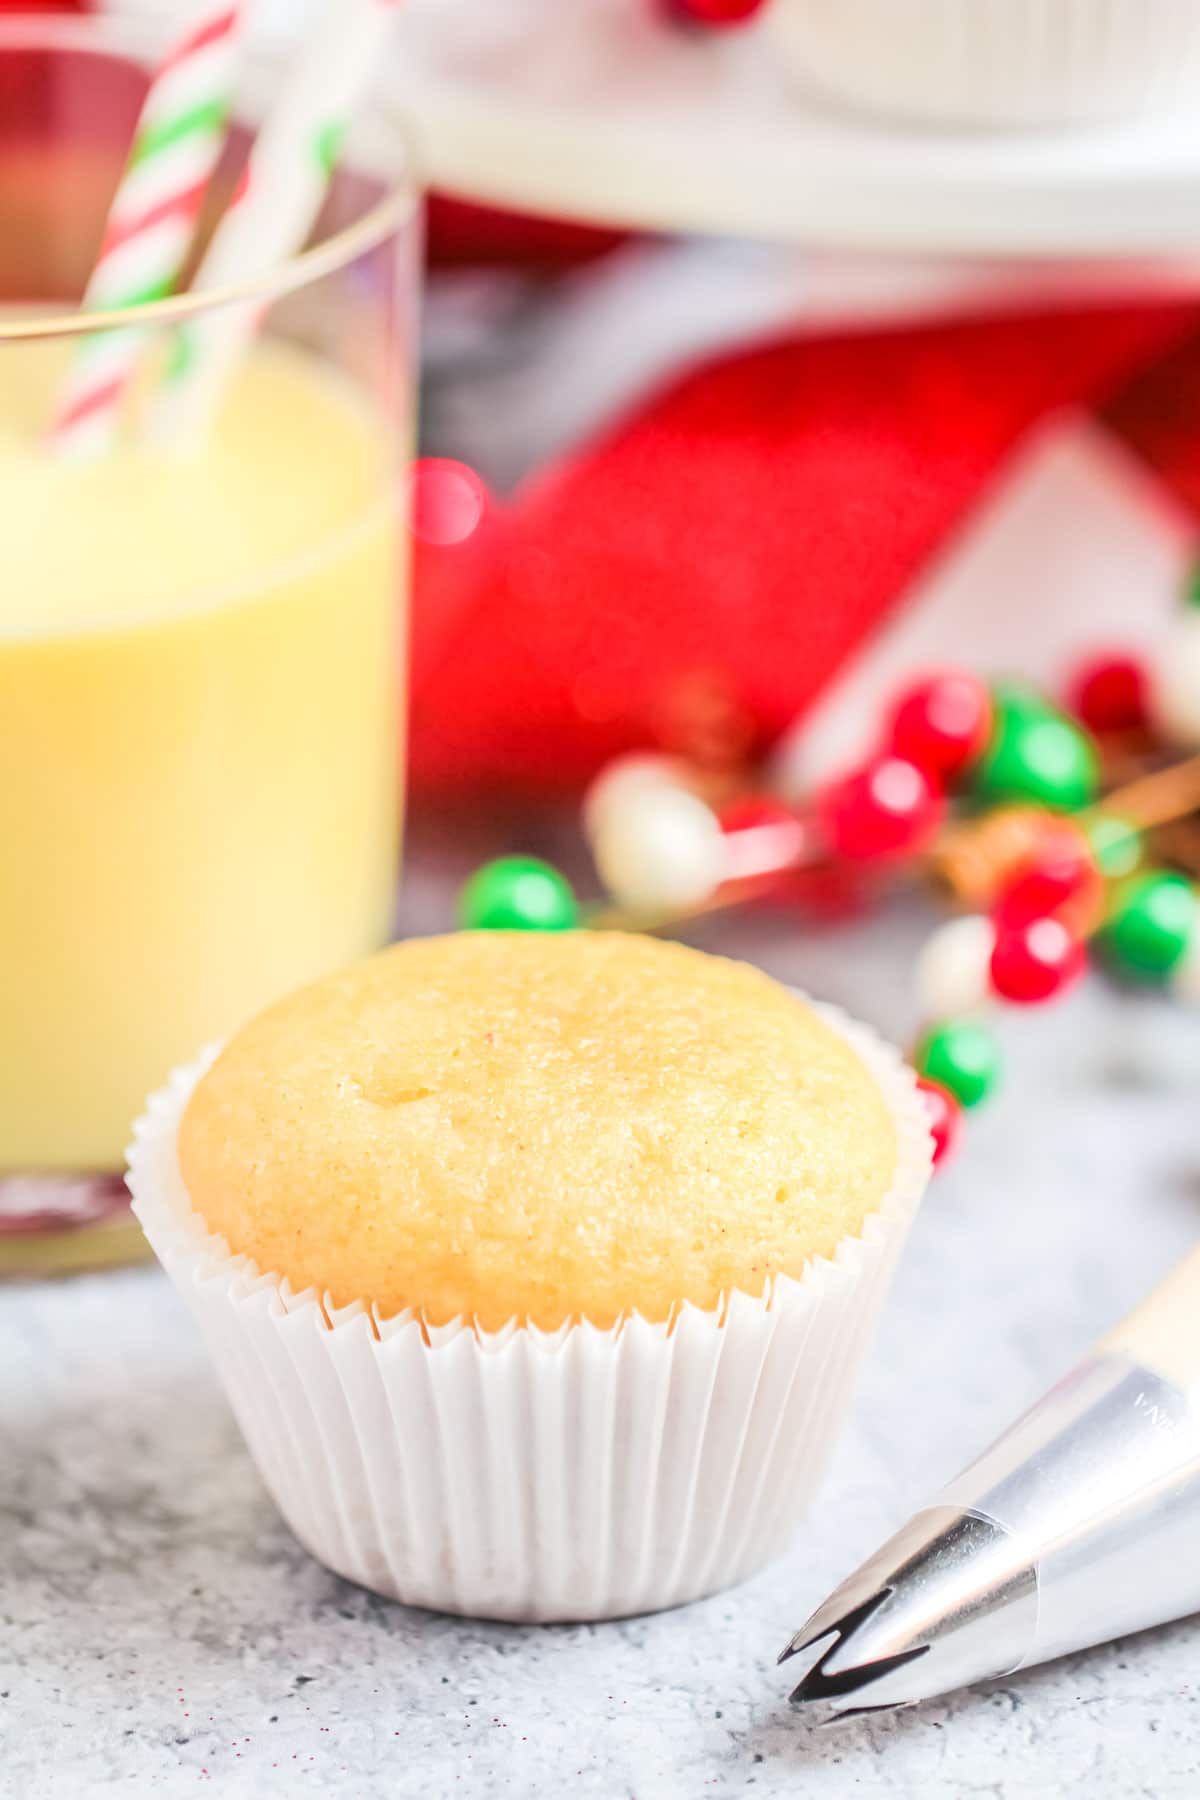 An unfrosted cupcake next to a piping bag, in the background a glass of eggnog with a straw in it.